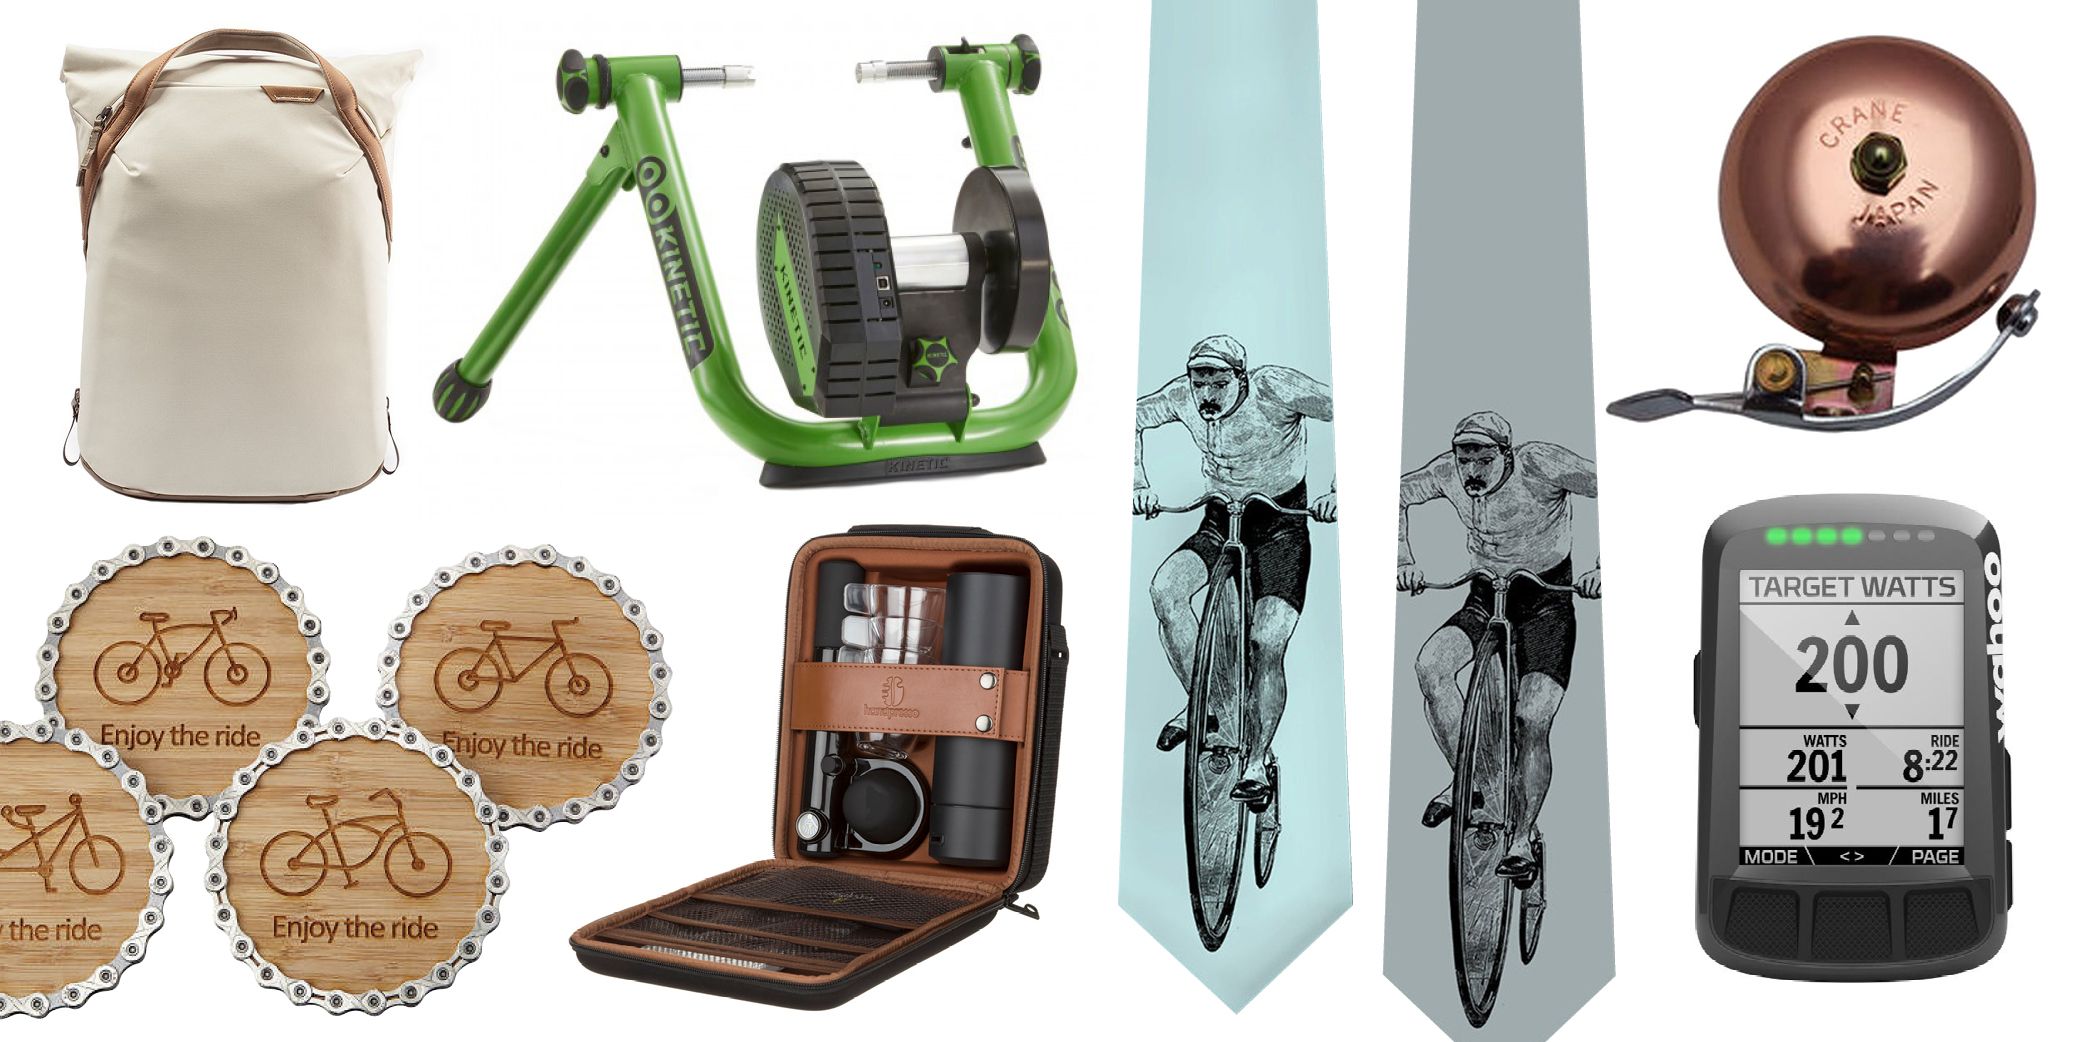 Discover more than 136 gifts for cyclists